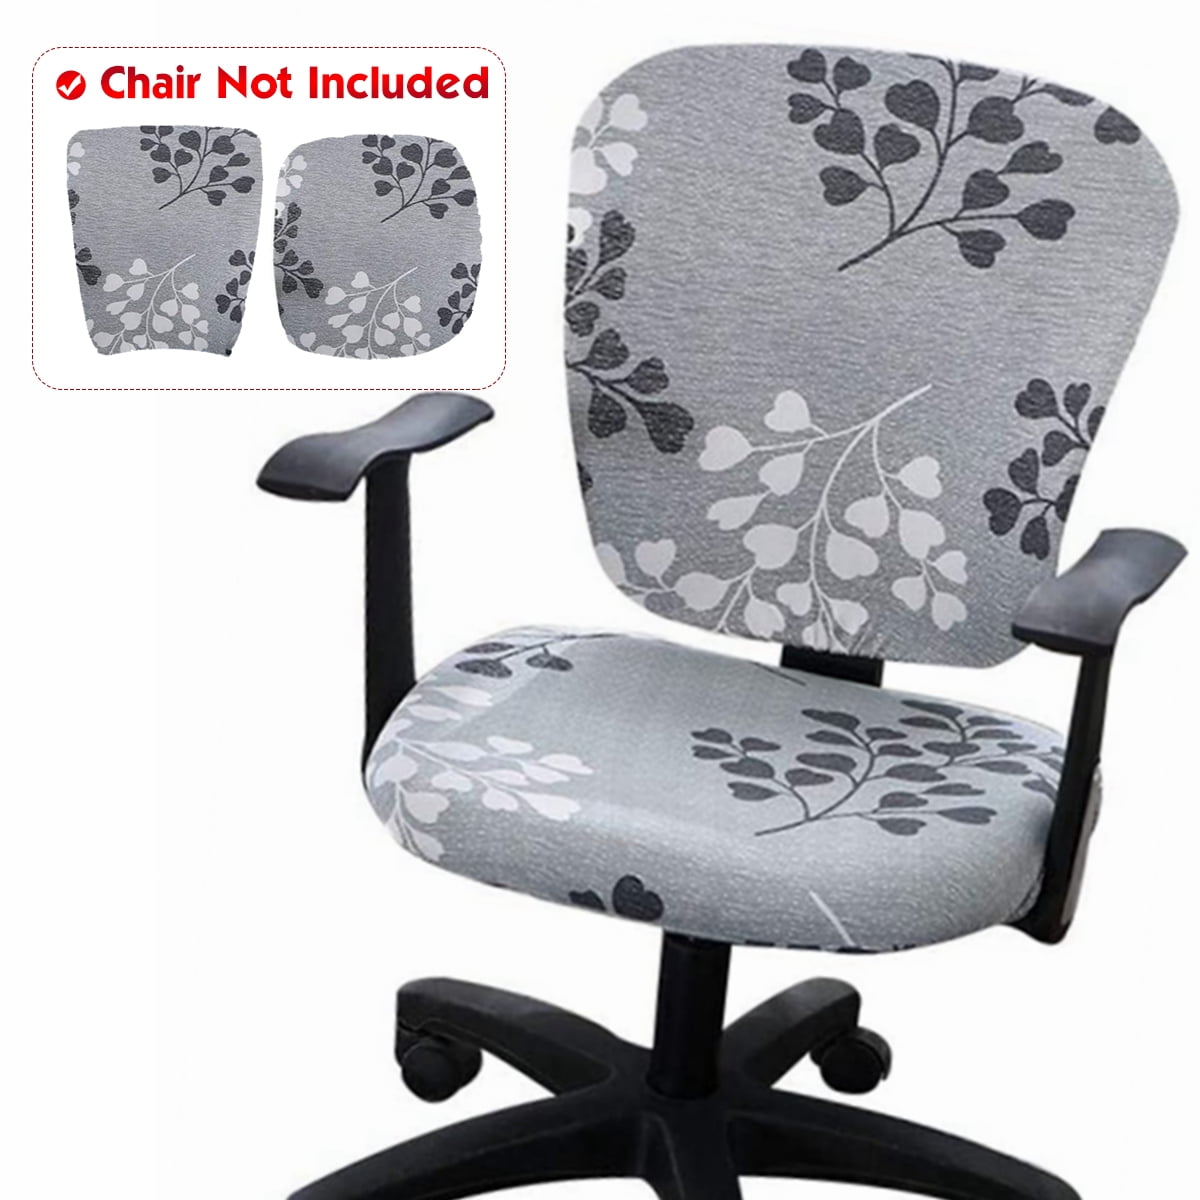 Protective Chair Cover Stretchy Armchair Slipcover Swivel Chair Office Room Seat 